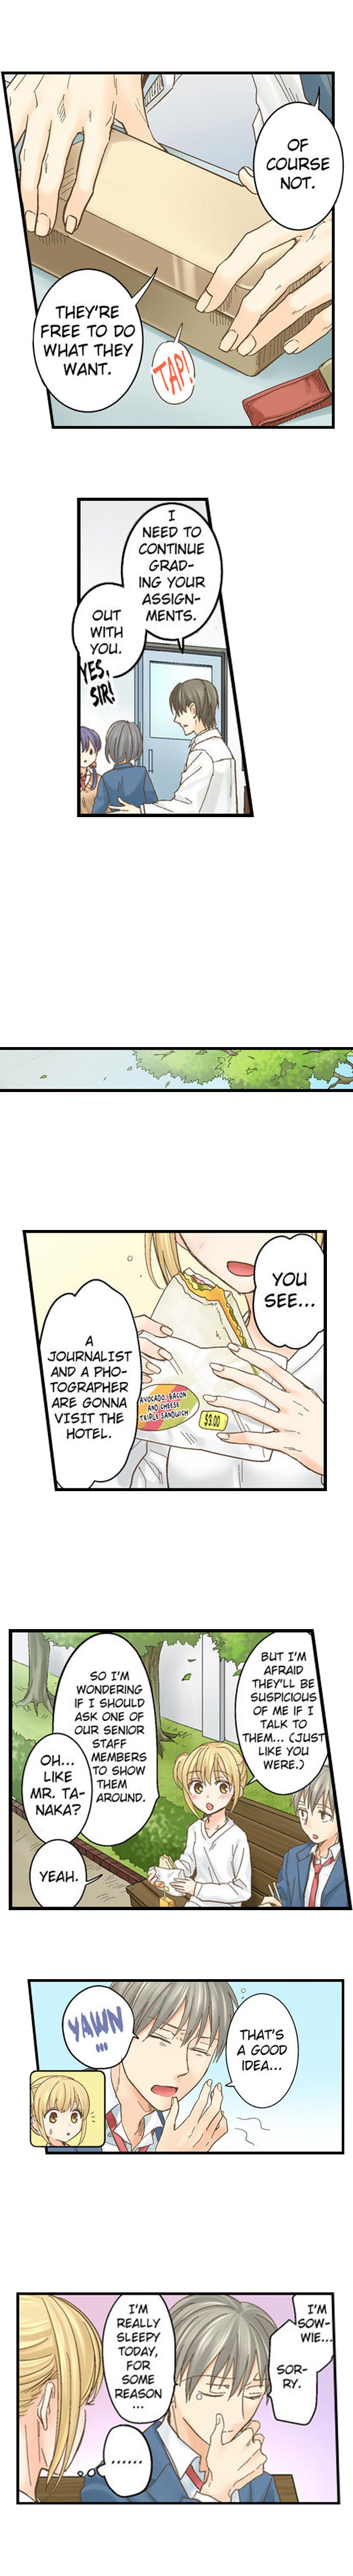 Running a Love Hotel with My Math Teacher - Chapter 53 Page 2